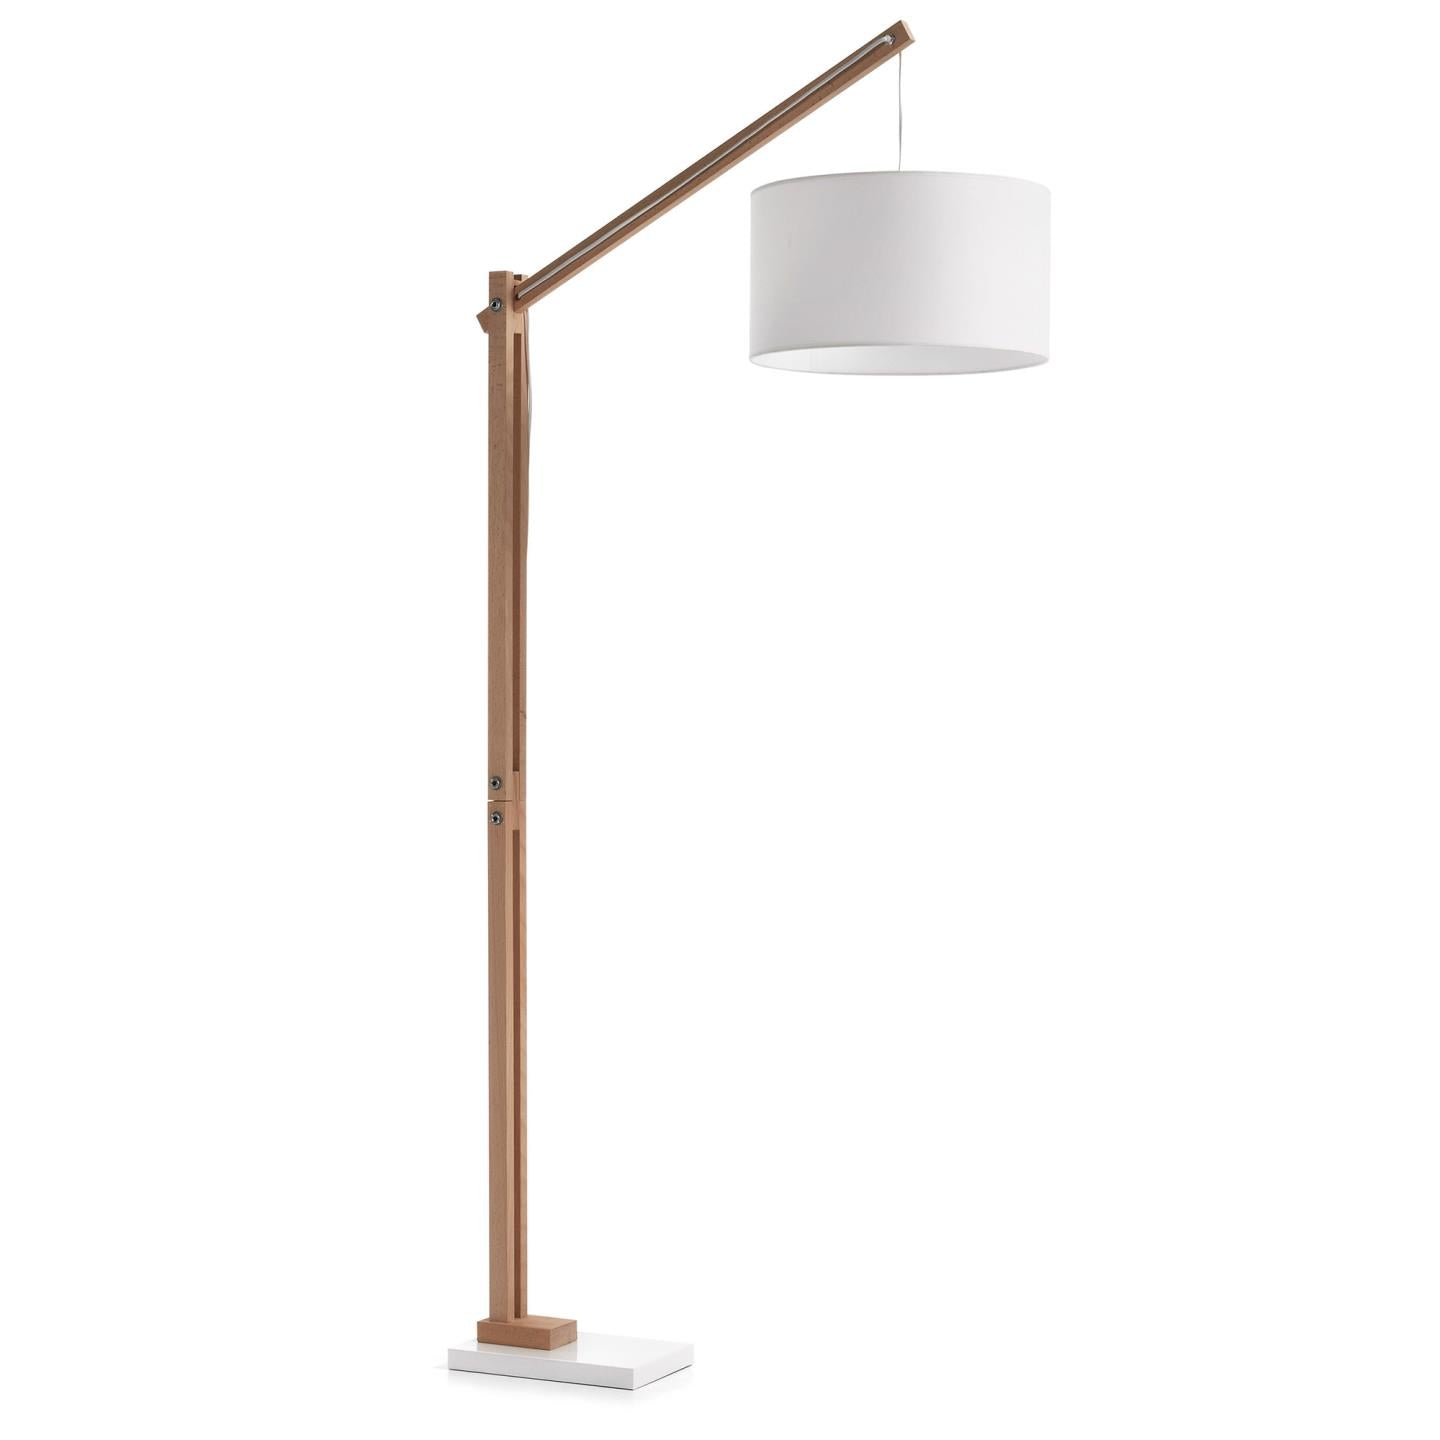 Riaz floor lamp in beech wood with white lampshade